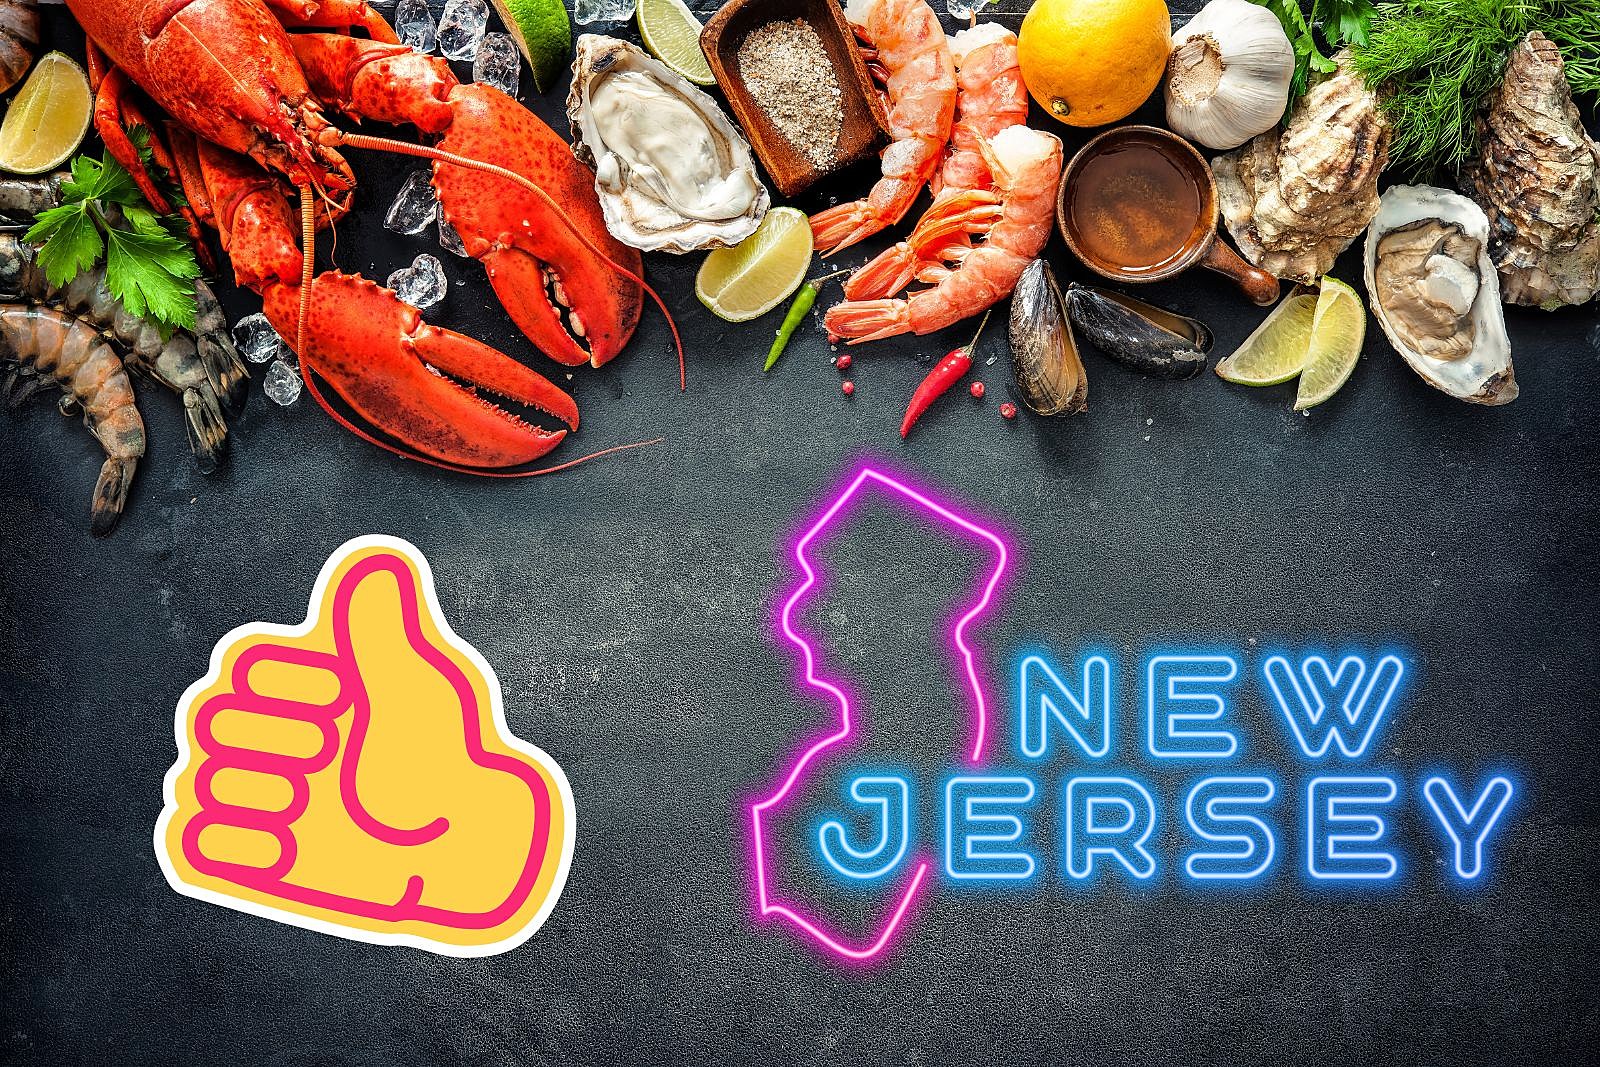 Best Seafood in New Jersey Found in a Very Unusual Place